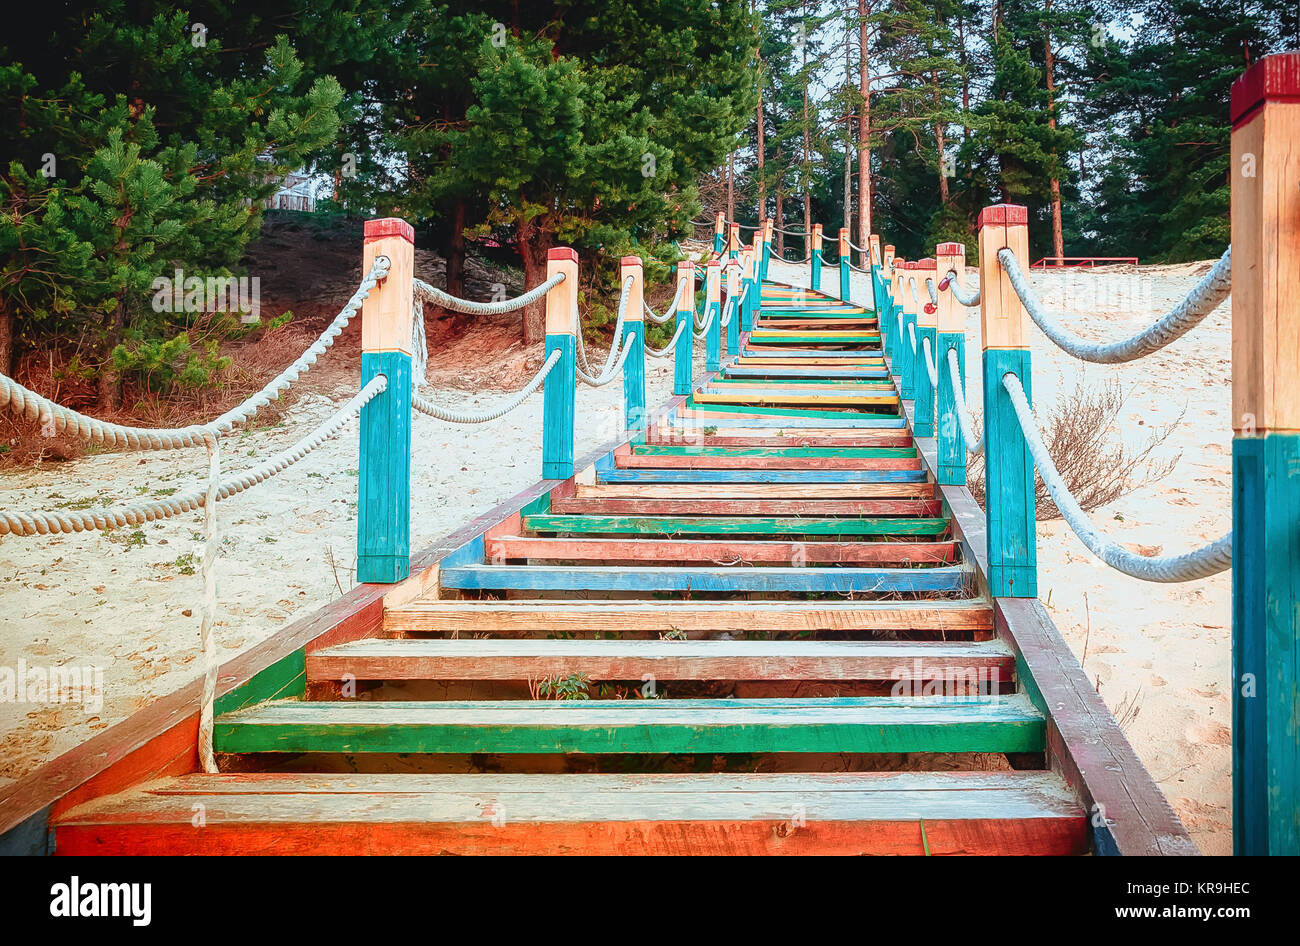 Color Wooden Staircase On The Beach Among The Pines Stock Photo